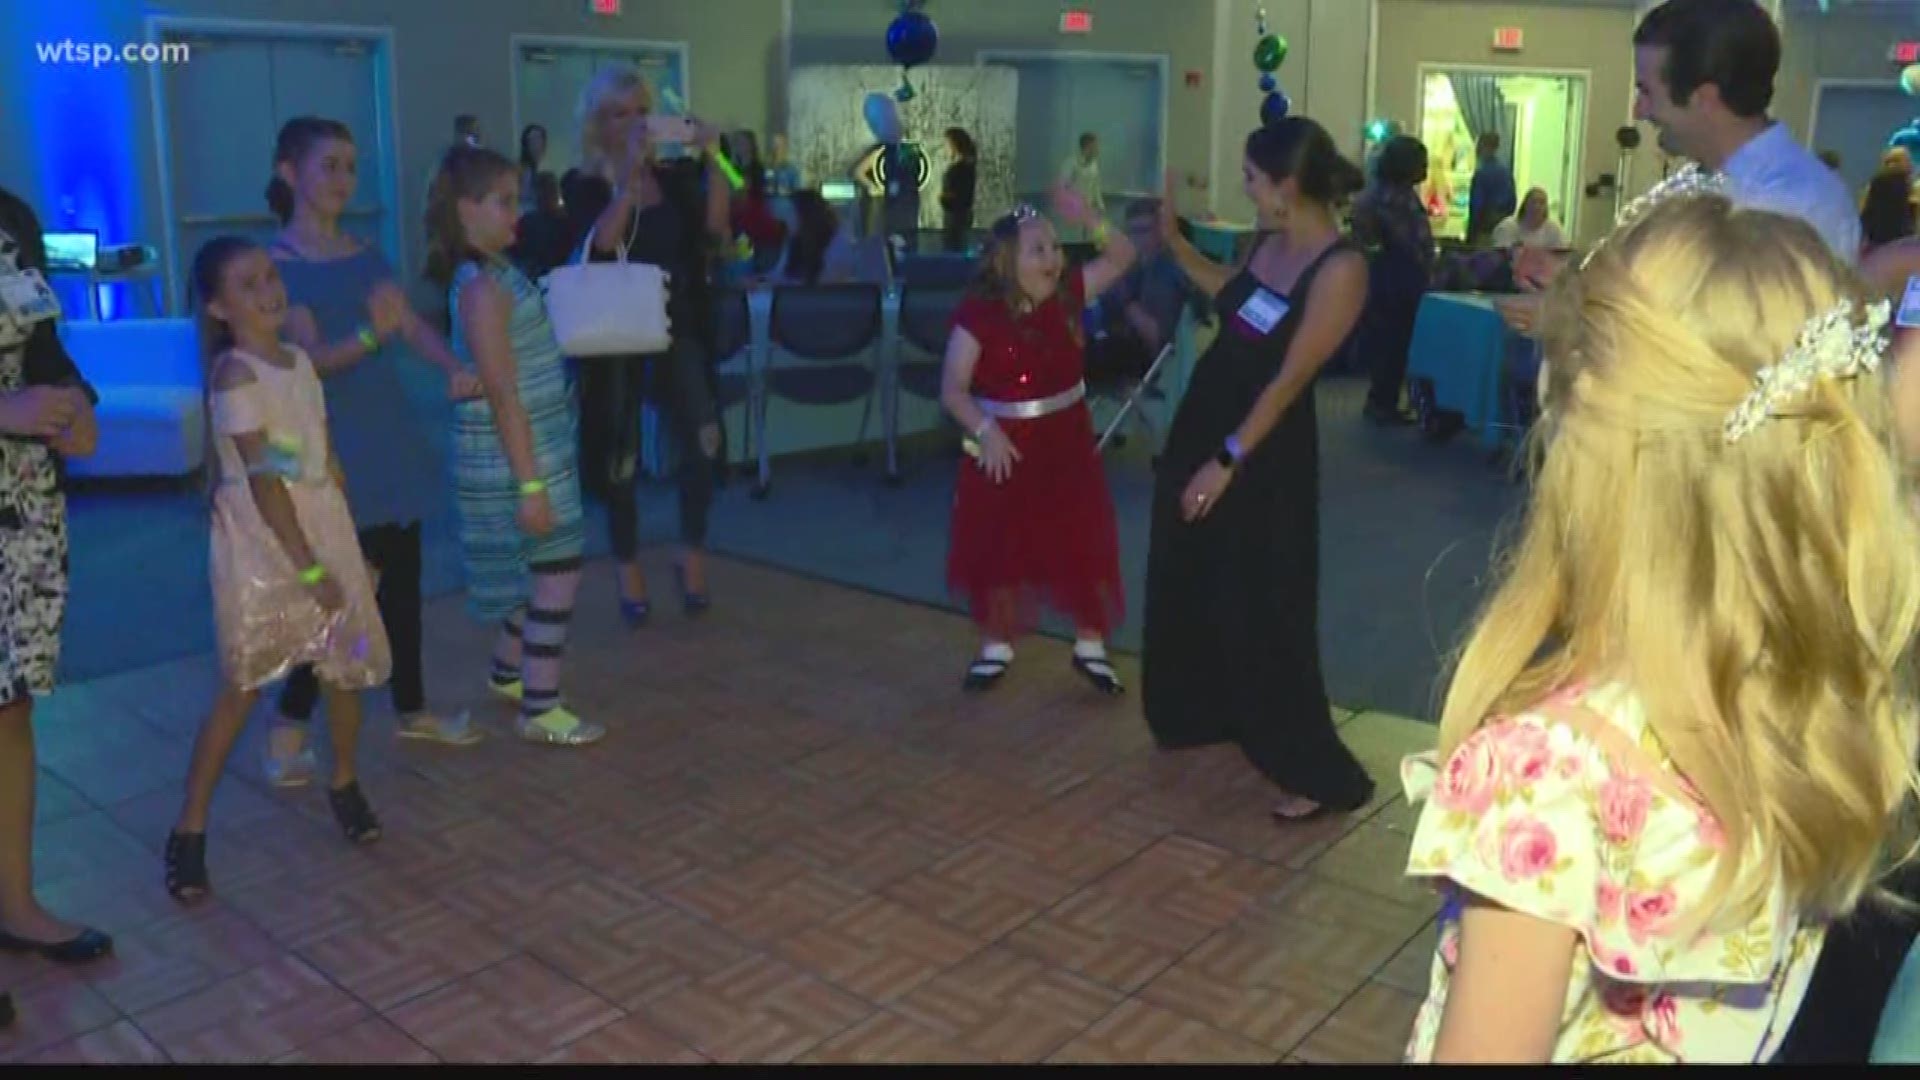 Kids with life-threatening conditions have to miss out on special moments in their lives, like prom.

That’s why St. Joseph’s Children’s Hospital hosted a prom for patients who weren’t able to make their own because they were hospitalized or had a life-threatening sickness keeping them from going.

The event started with an all-day affair that included picking out dresses, suits and getting glammed up for the big evening.

The night was full of music, dancing refreshments, keepsake photos and a lifetime of memories.